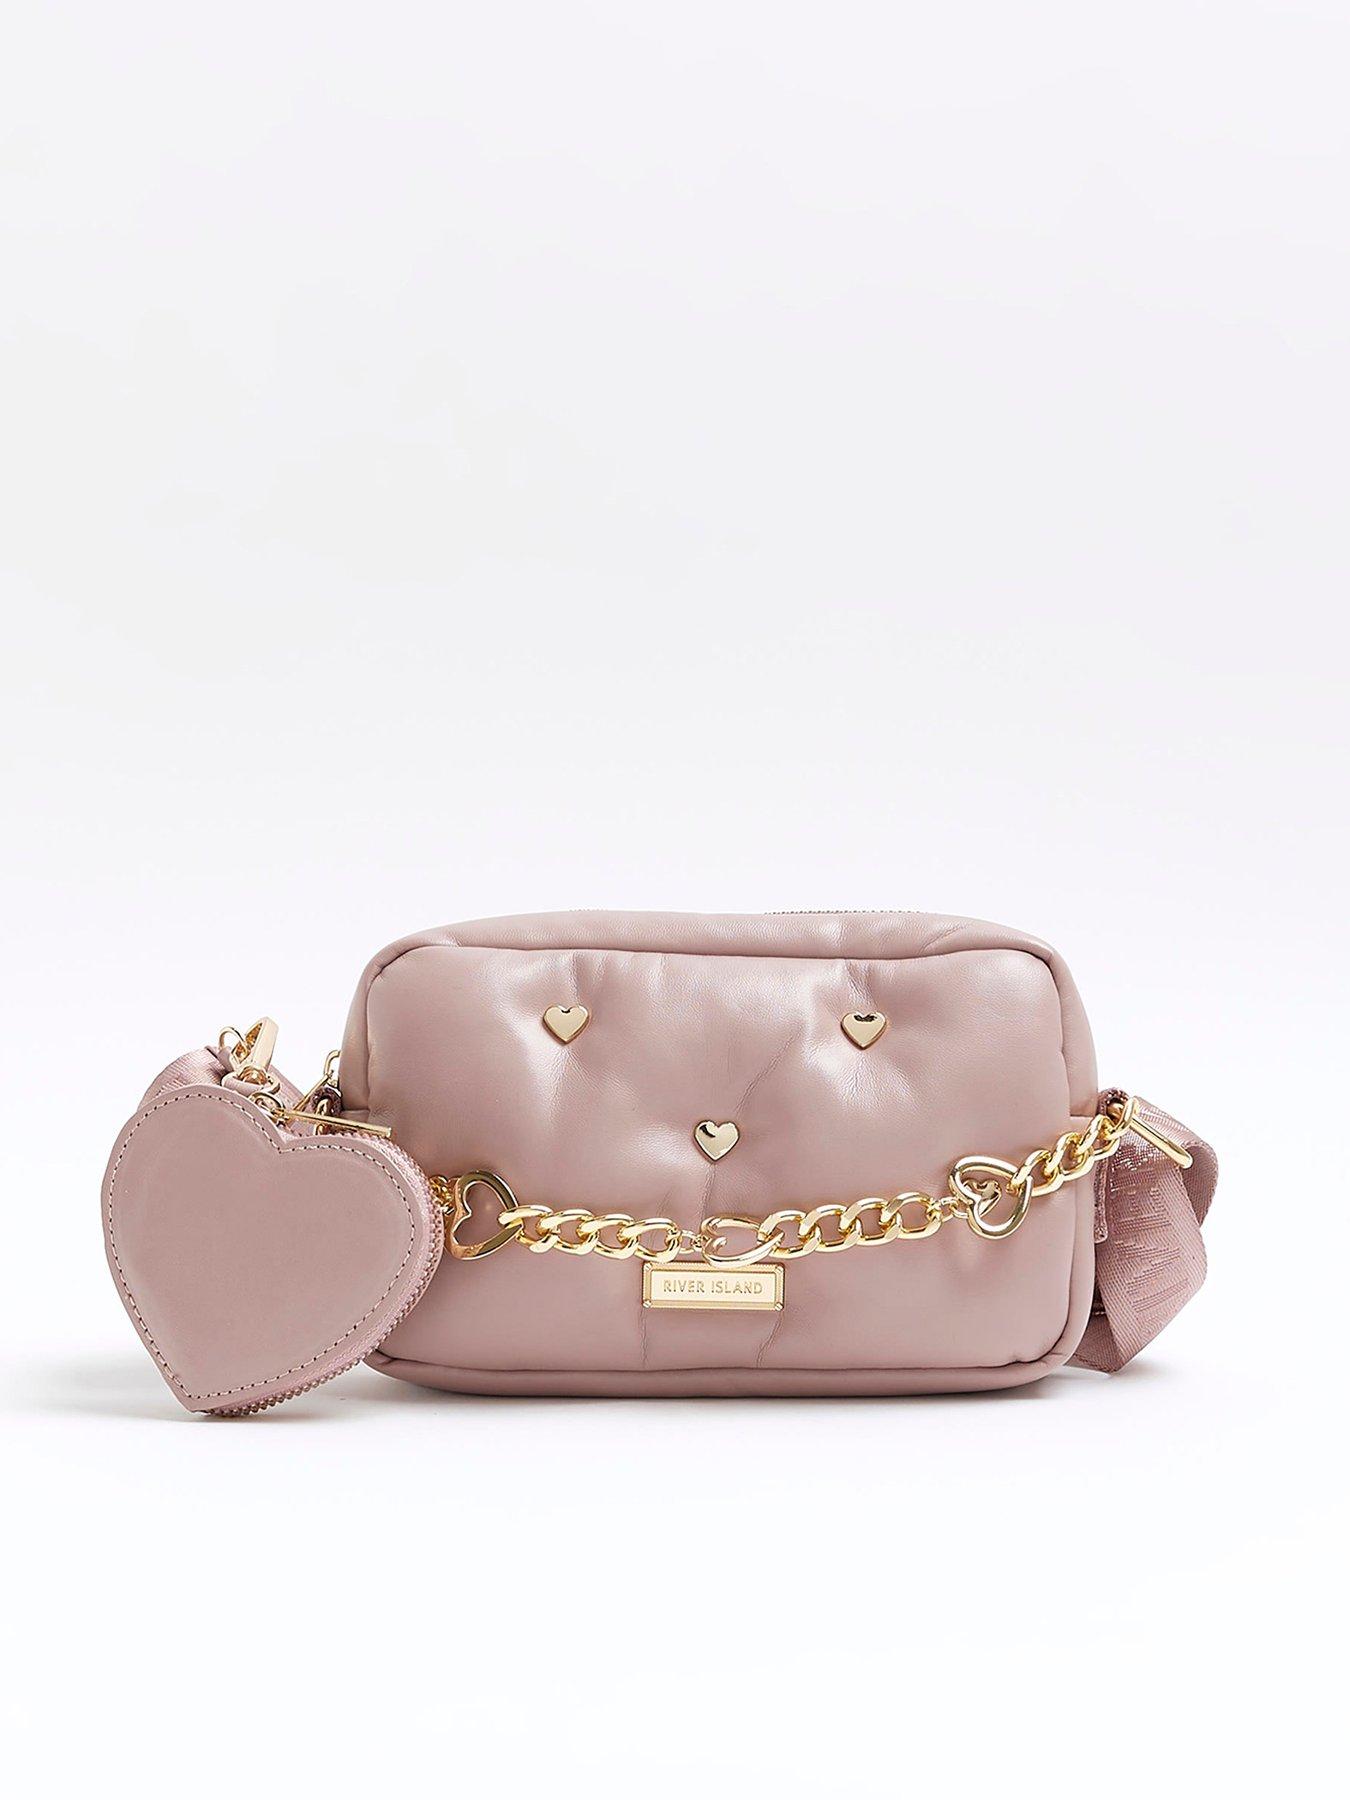 Marc Jacobs Heart Leather Pink Crossbody Bag MSRP $300